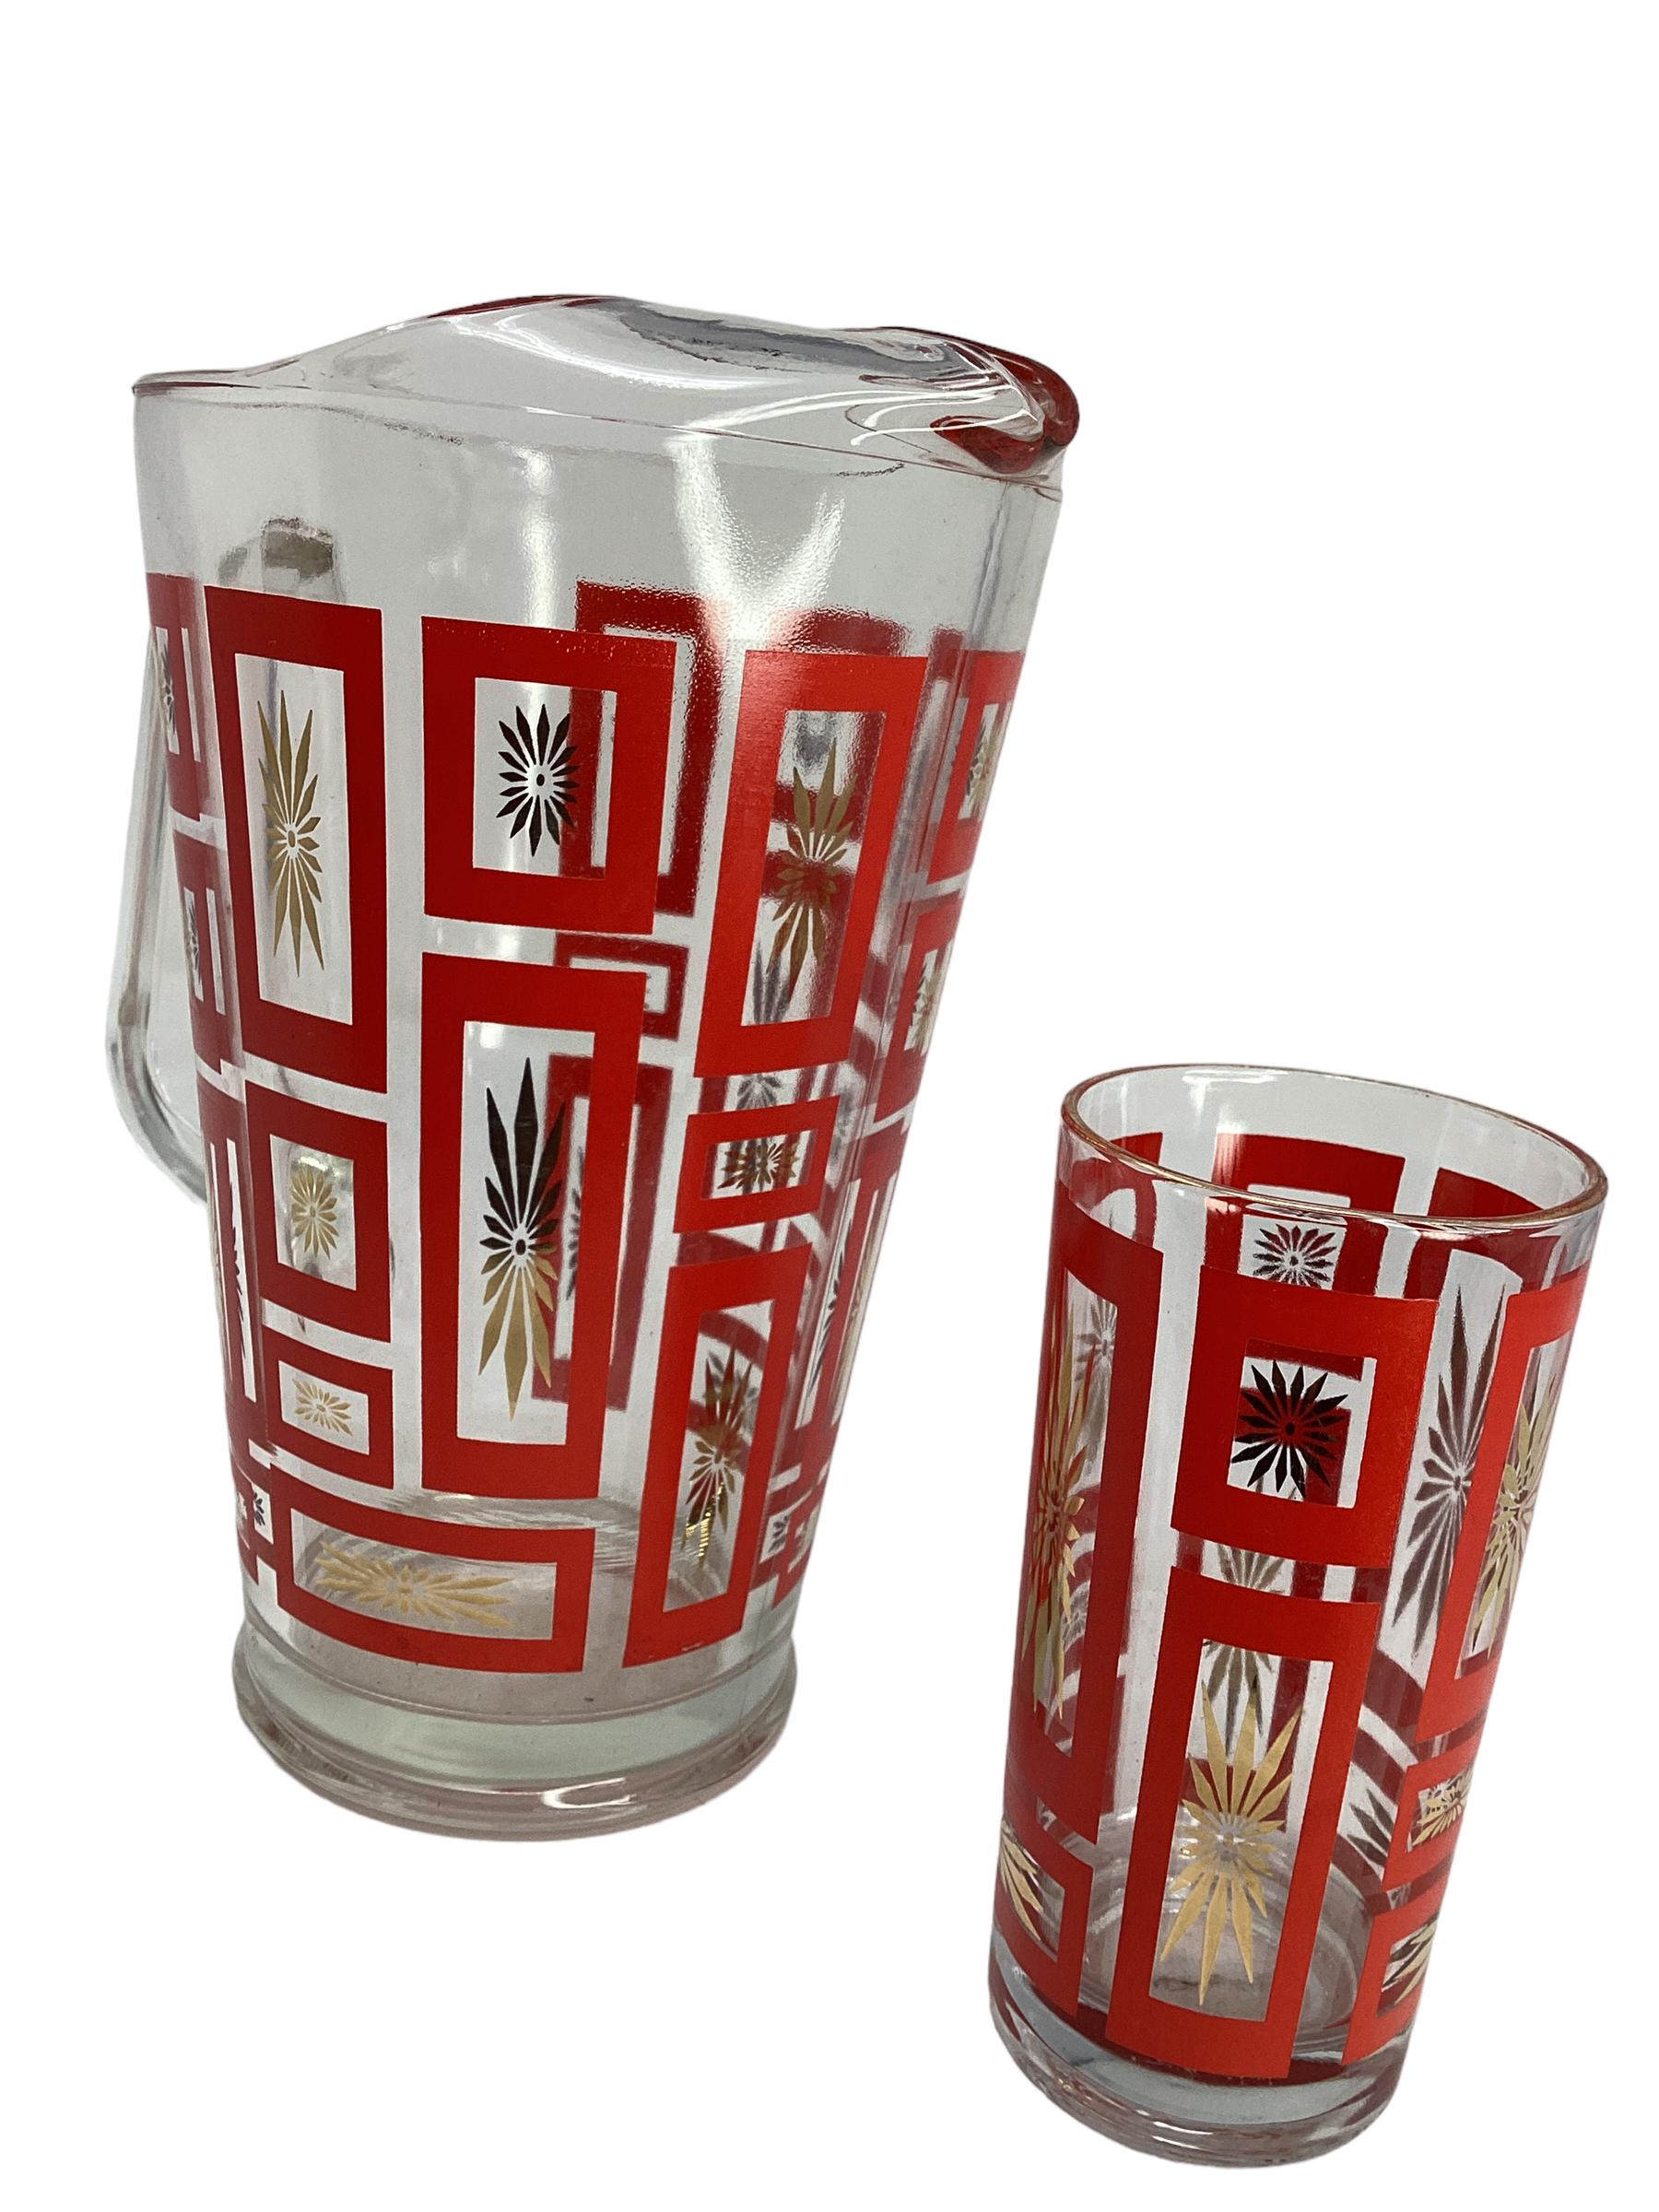 Vintage Mid Century Cocktail Set by Federal Glass. The set consists of a large pitcher and 10 highball glasses. Decorated geometric shapes with gold starburst inside each panel. A fun colorful design. The pitcher measures 7.5”w x 5.5”d x 9.5”h